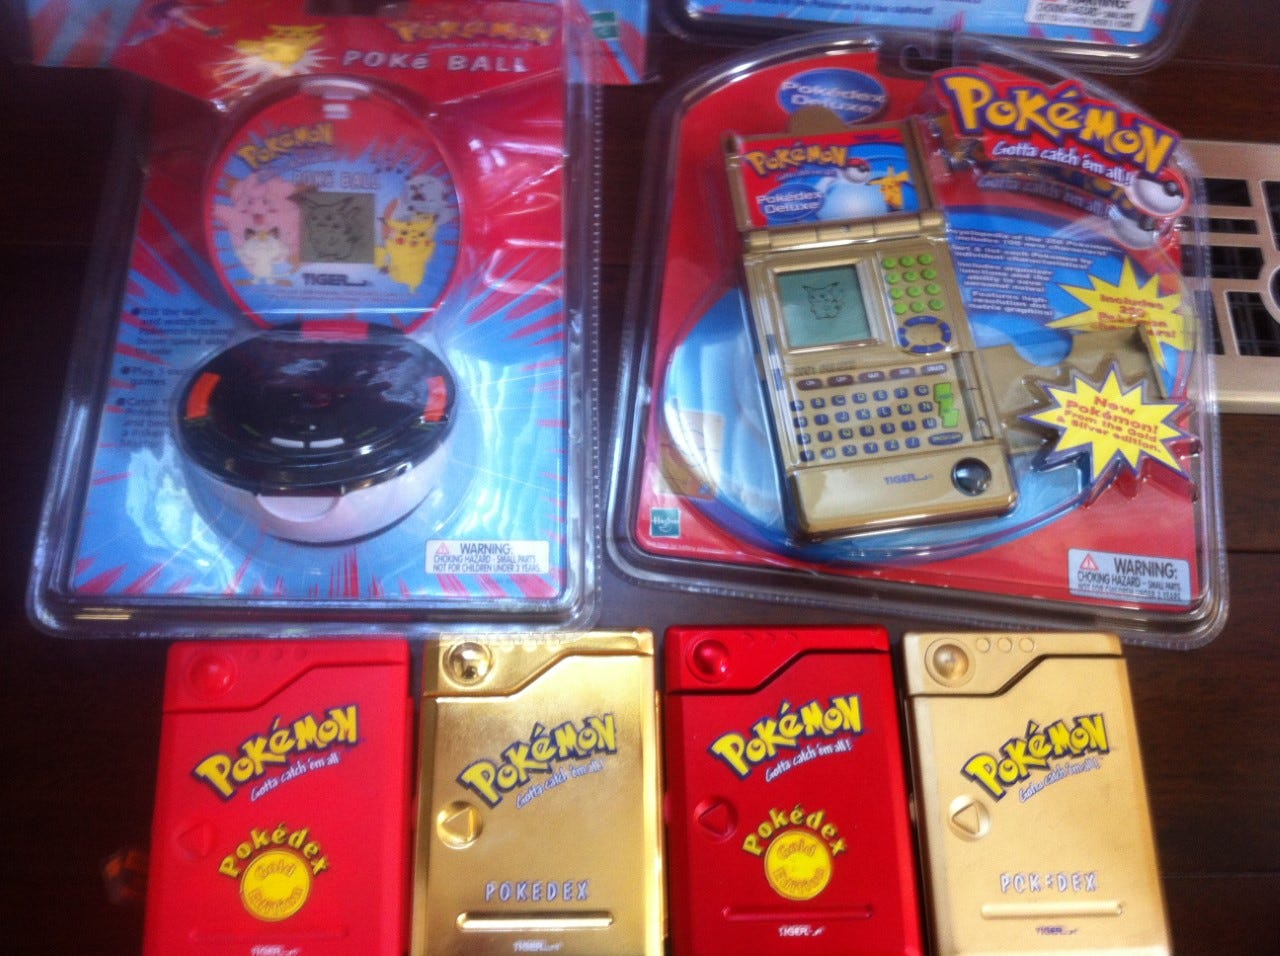 A picture of the “Gold Vac-Metal Pokedex”, an unreleased prototype of the original Pokédex. Also pictured are toys Chris worked on, including the Poké Ball, and the Pokédex Deluxe.